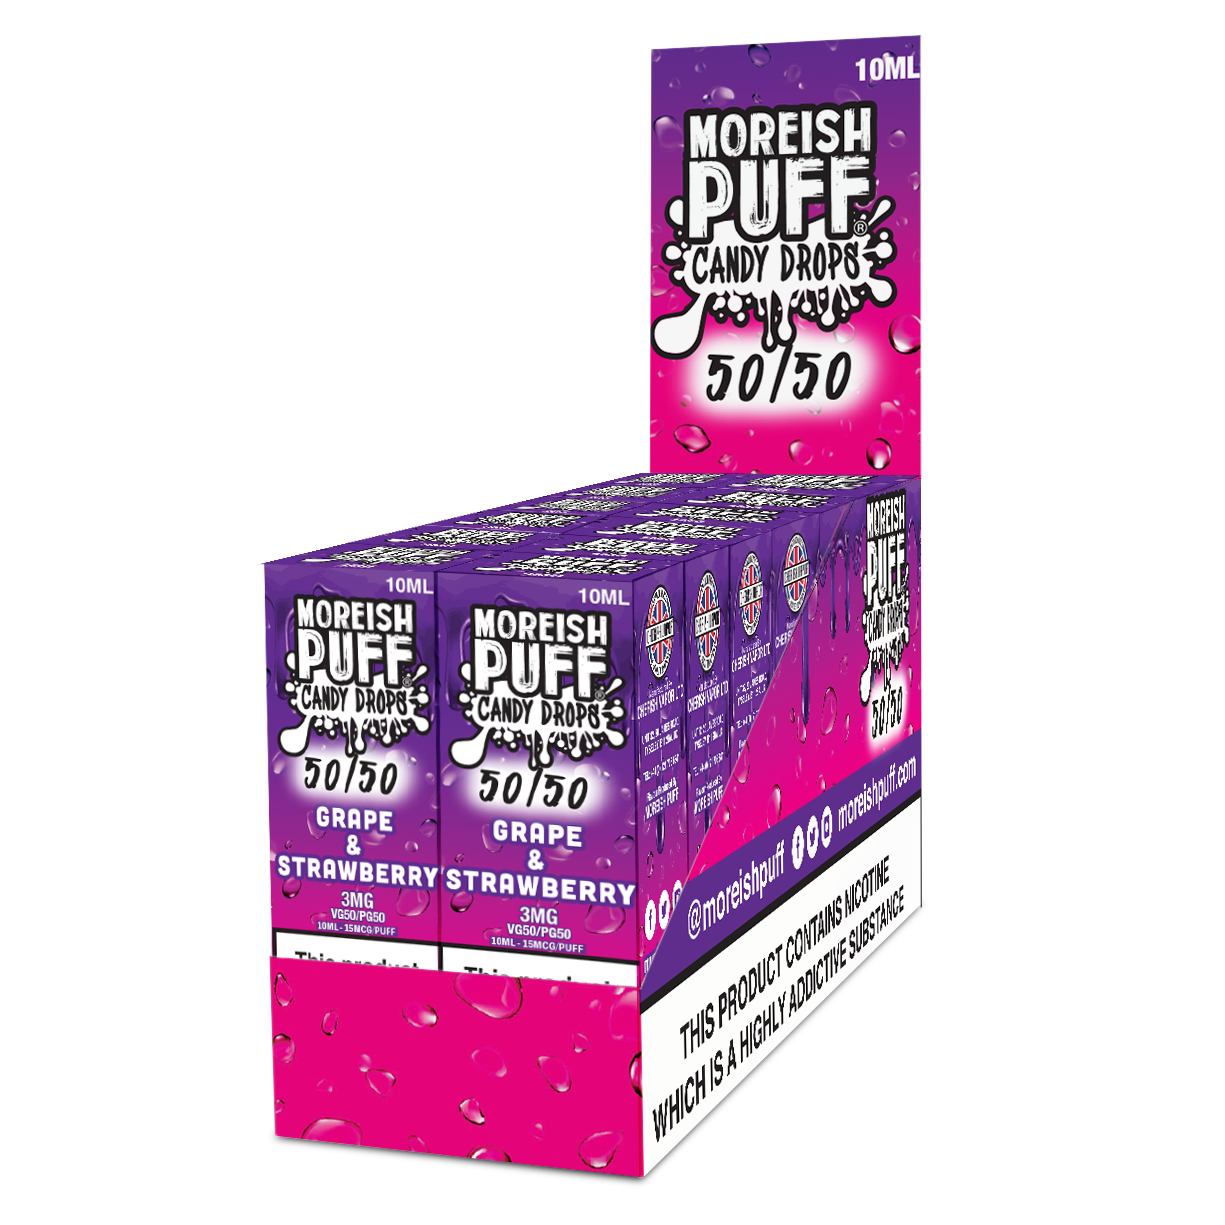 Moreish Puff Candy Drops 50/50 10ml Pack of 12